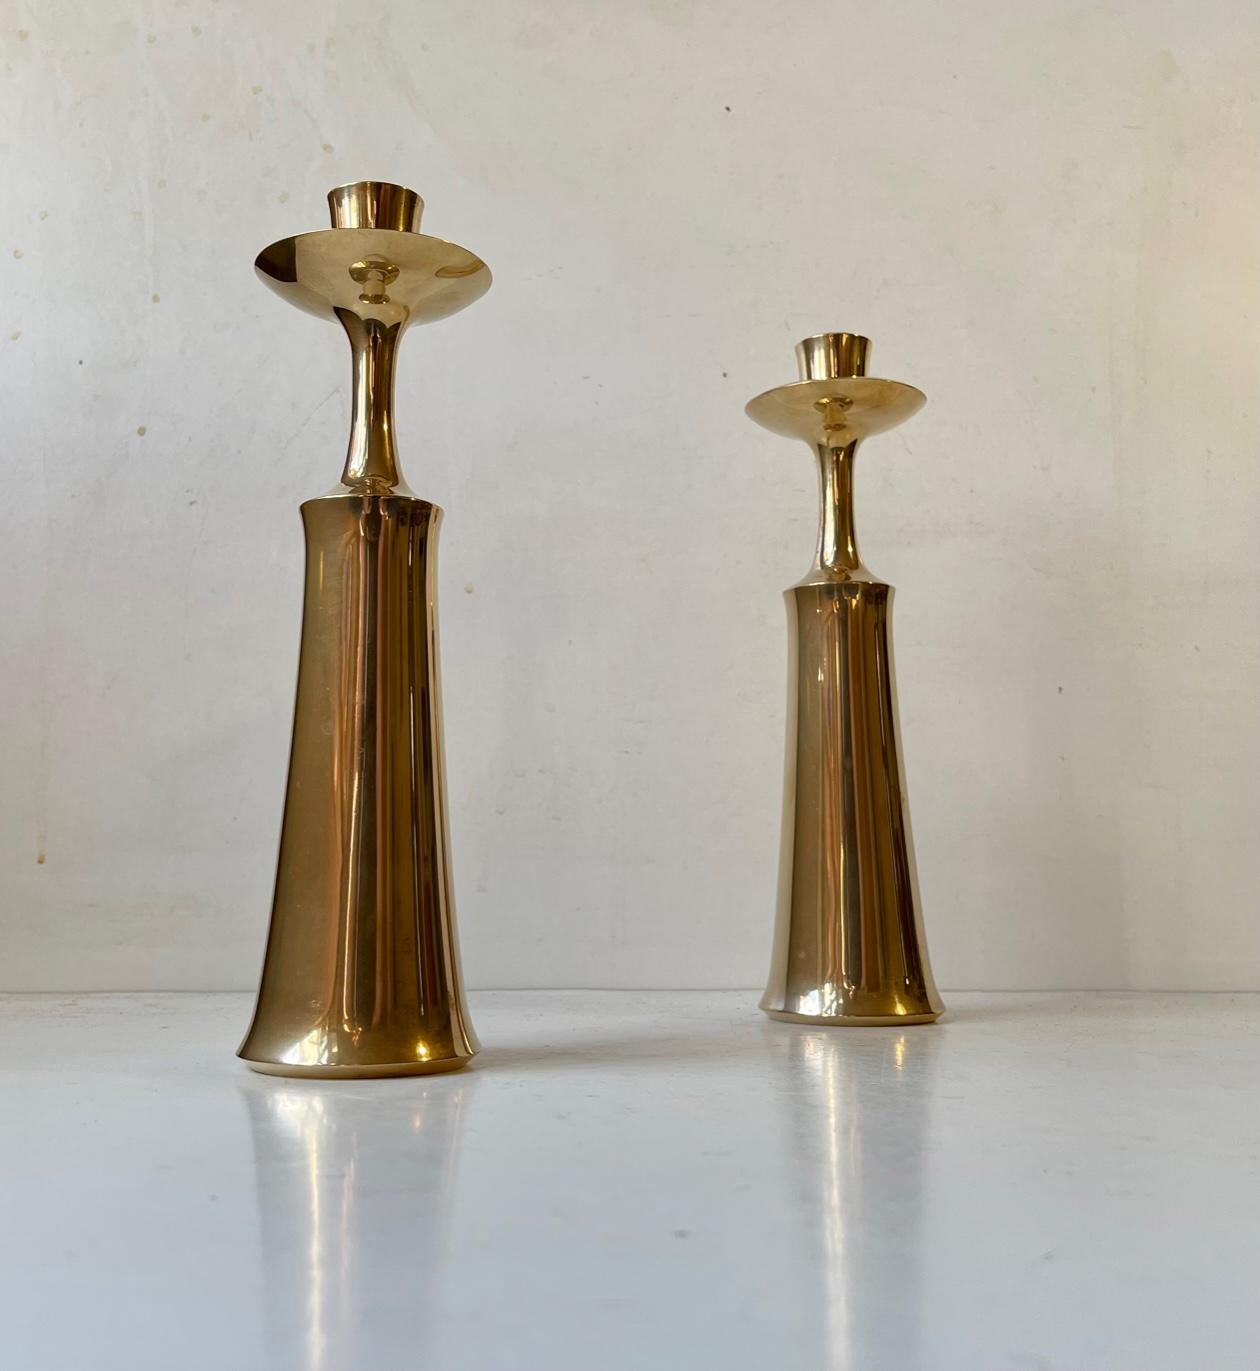 Mid-20th Century Large Danish Brass Candlesticks by Jens Harald Quistgaard, IHQ, 1960s For Sale